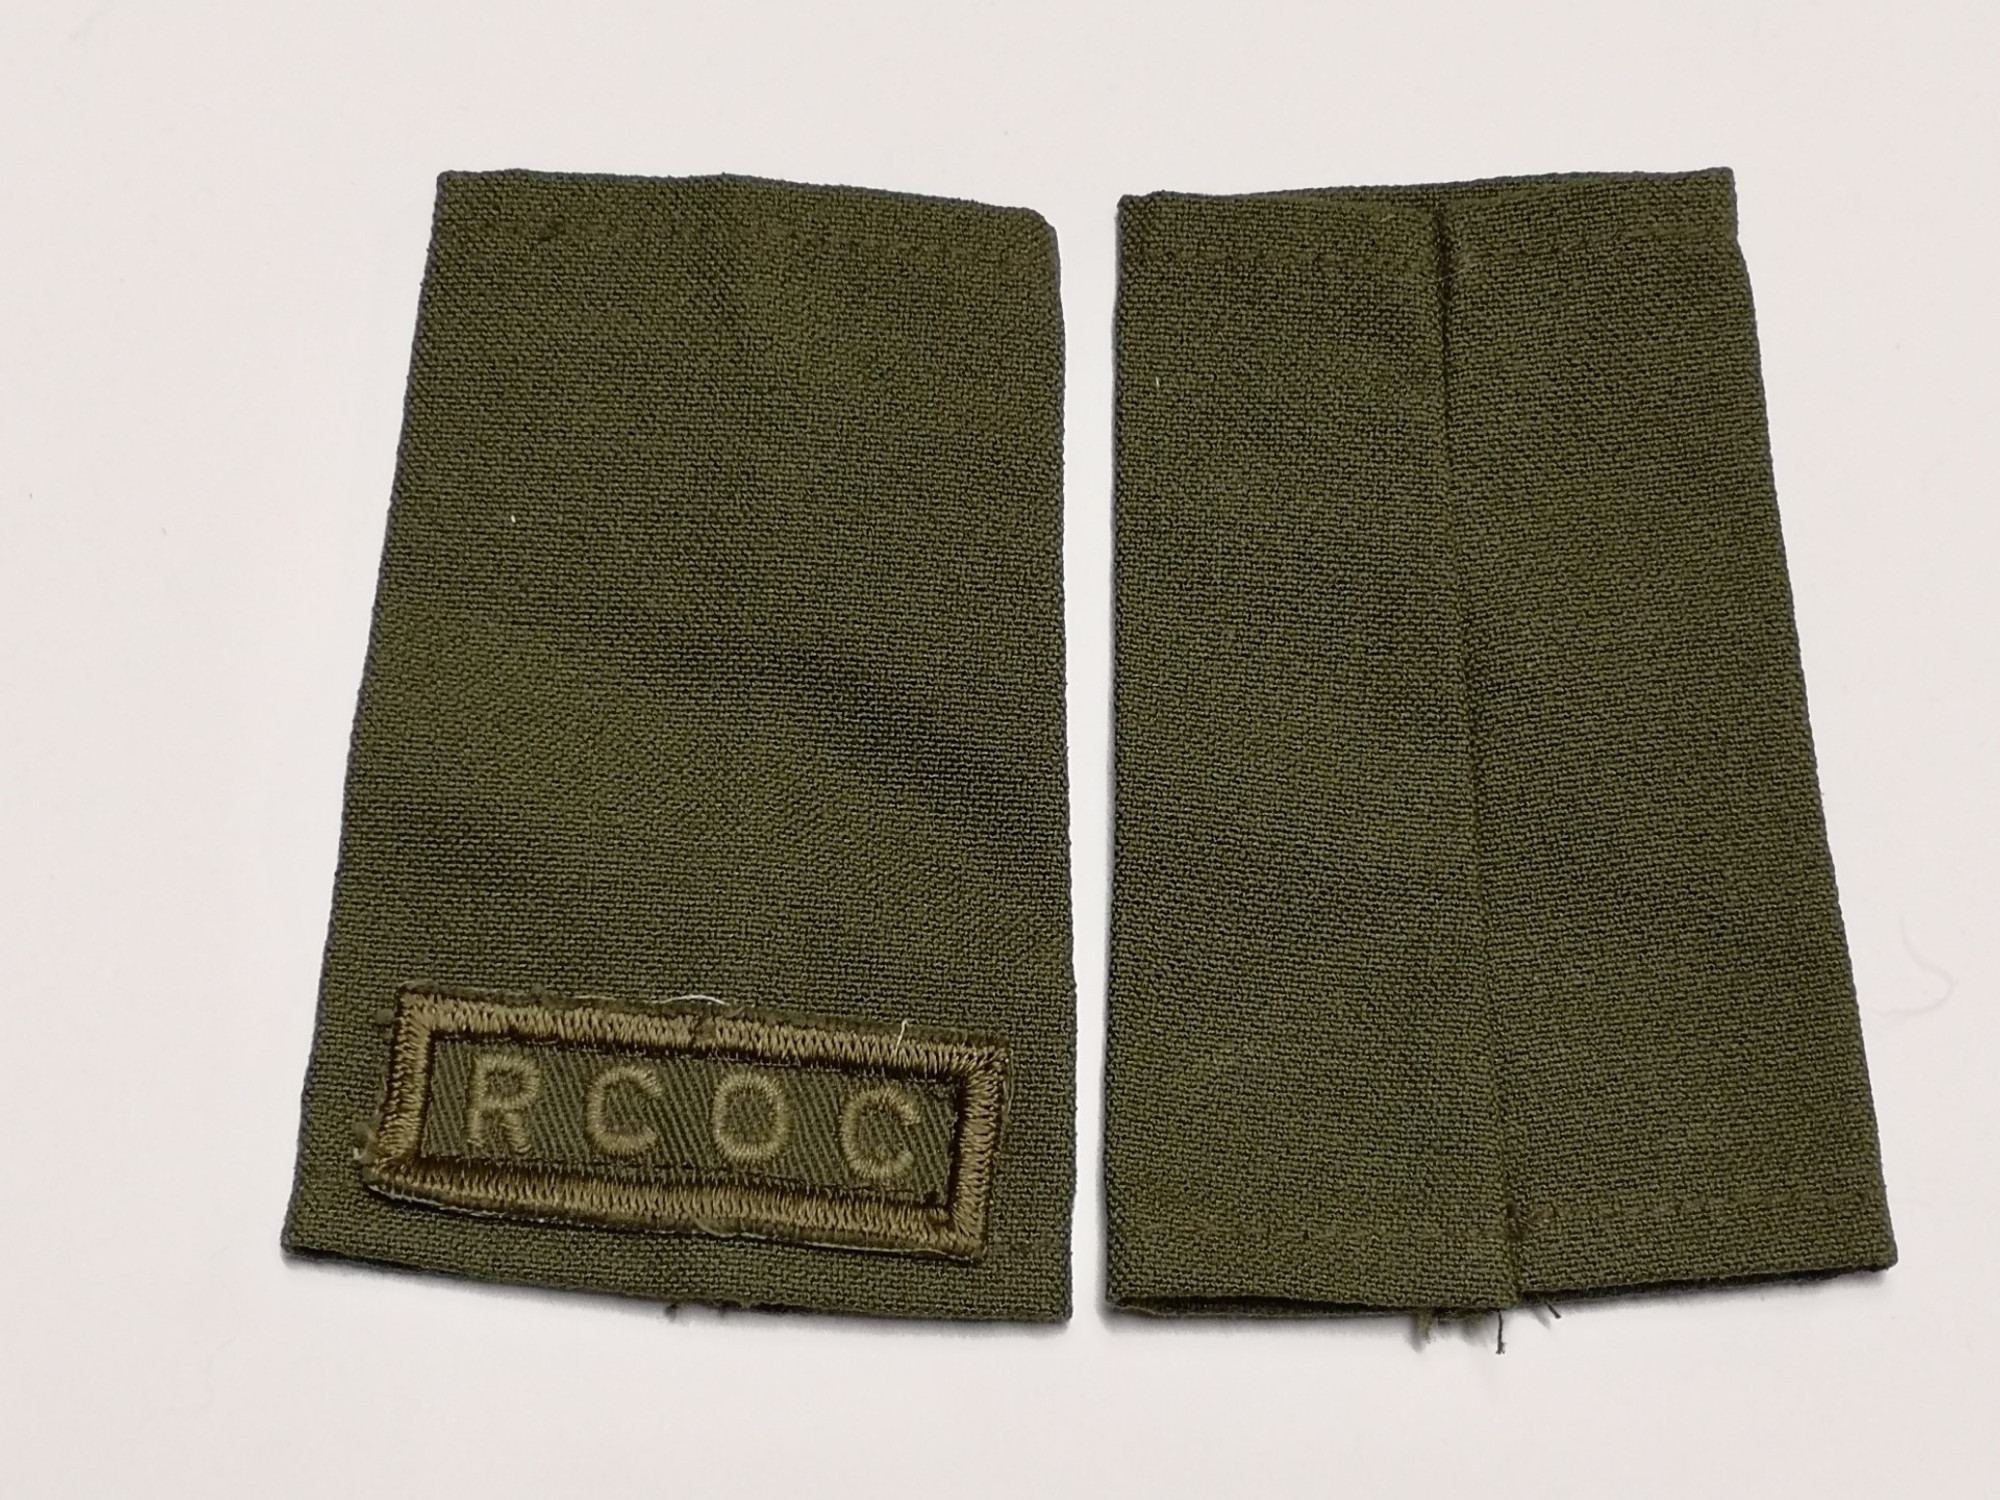 Canadian Armed Forces Green Rank Epaulets RCOC - Private (Basic)